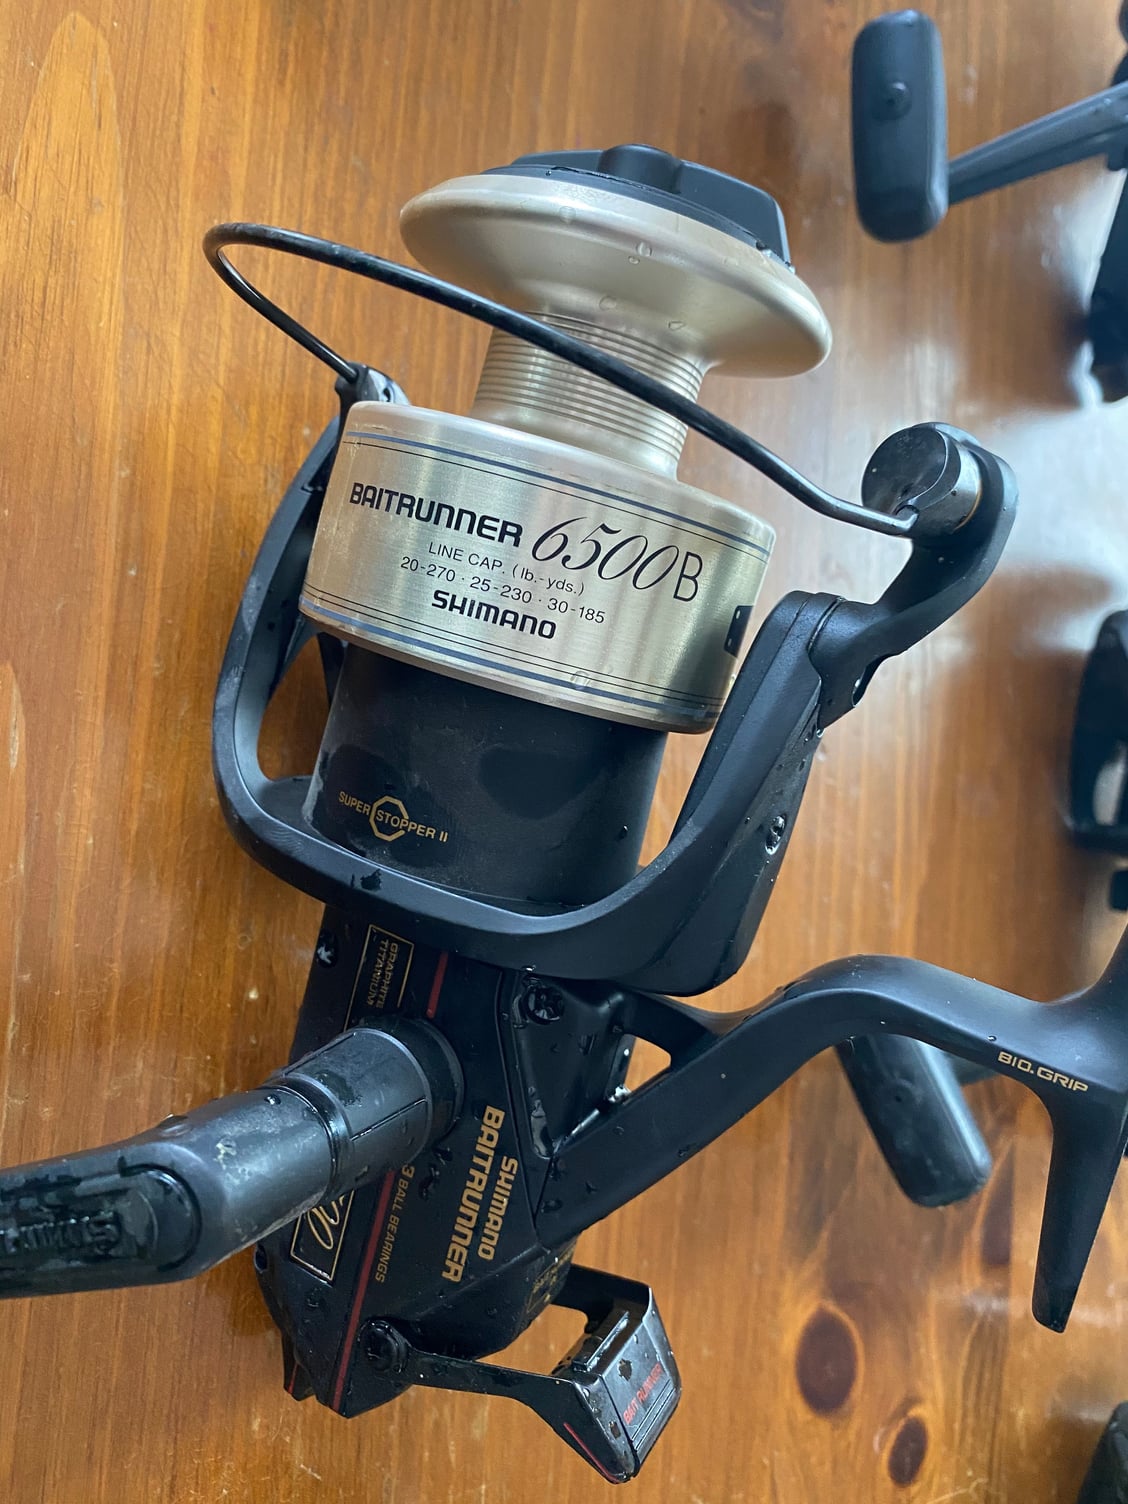 Old but new (7)shimano baitrunner 6500b for sale - The Hull Truth - Boating  and Fishing Forum